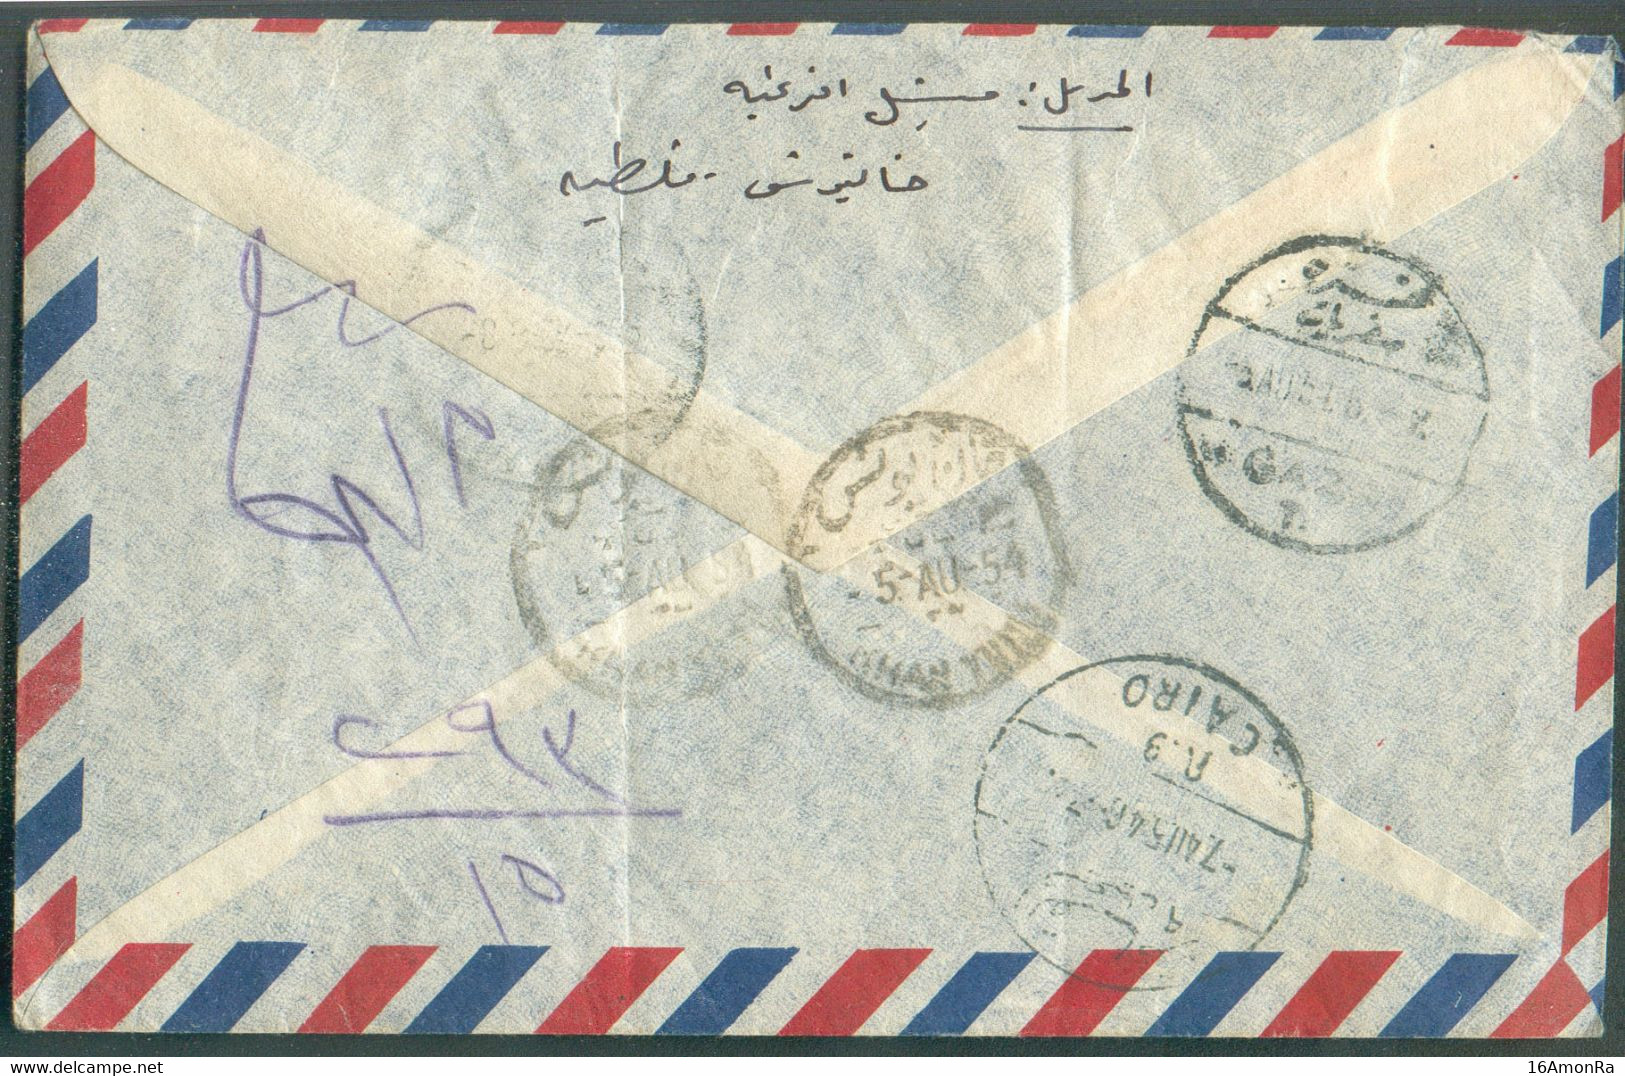 Poste Aerienne Stamps Of KING FAROUK 2, 3, 10 Et 20 Mills. Ovpt. PALESTINE Canc. KHAN YUNIS On Cover 5 August 1954 To Ca - Luchtpost